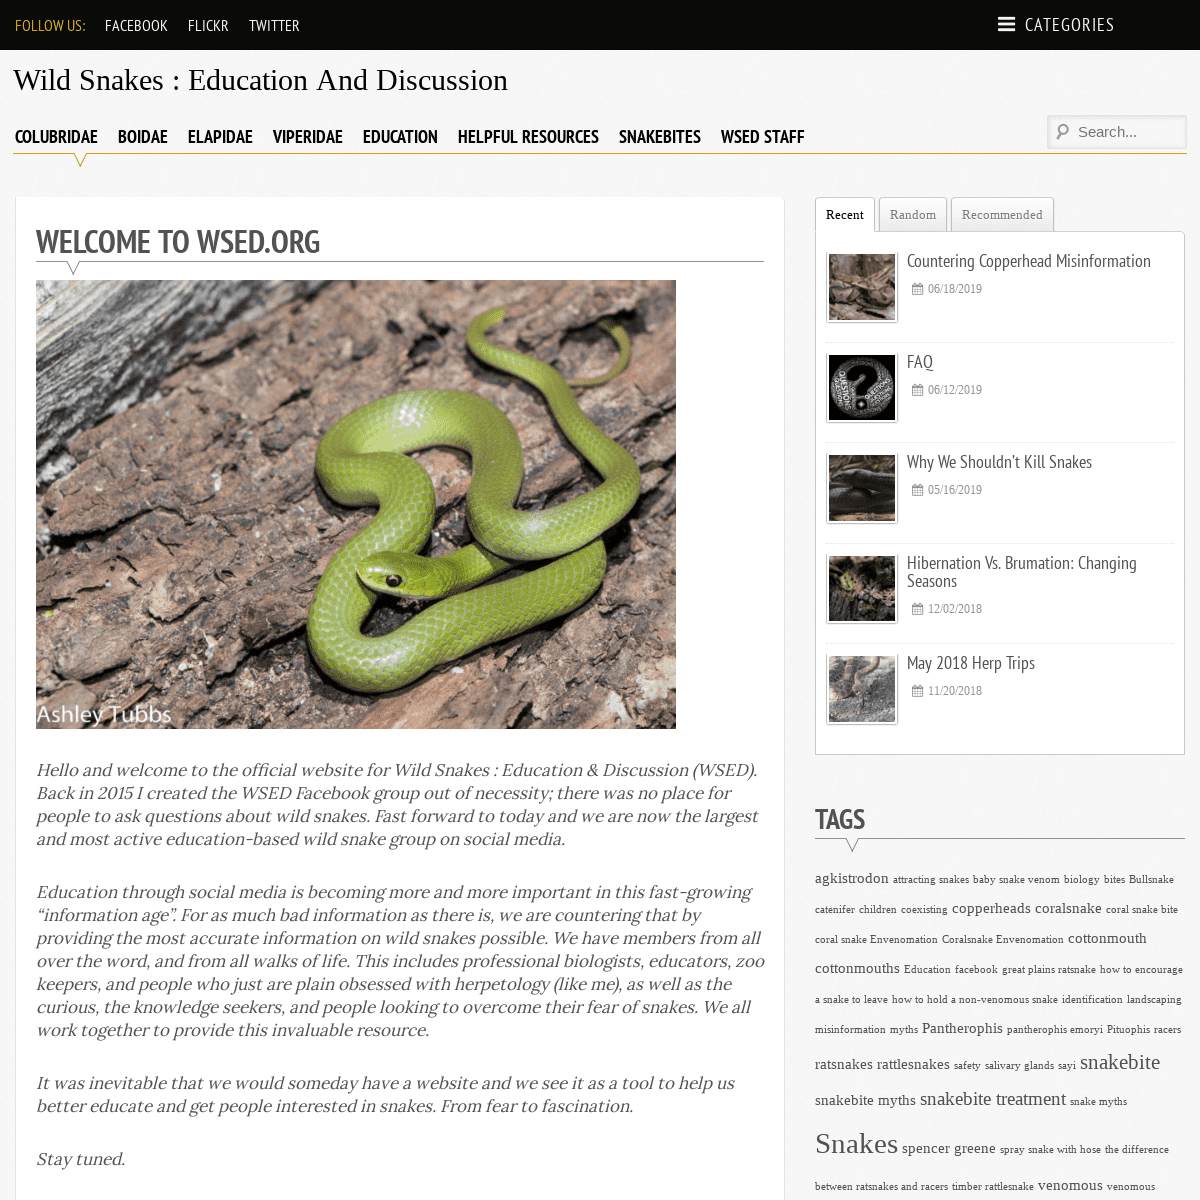 Wild Snakes : Education and Discussion – The official website for wild snake education.